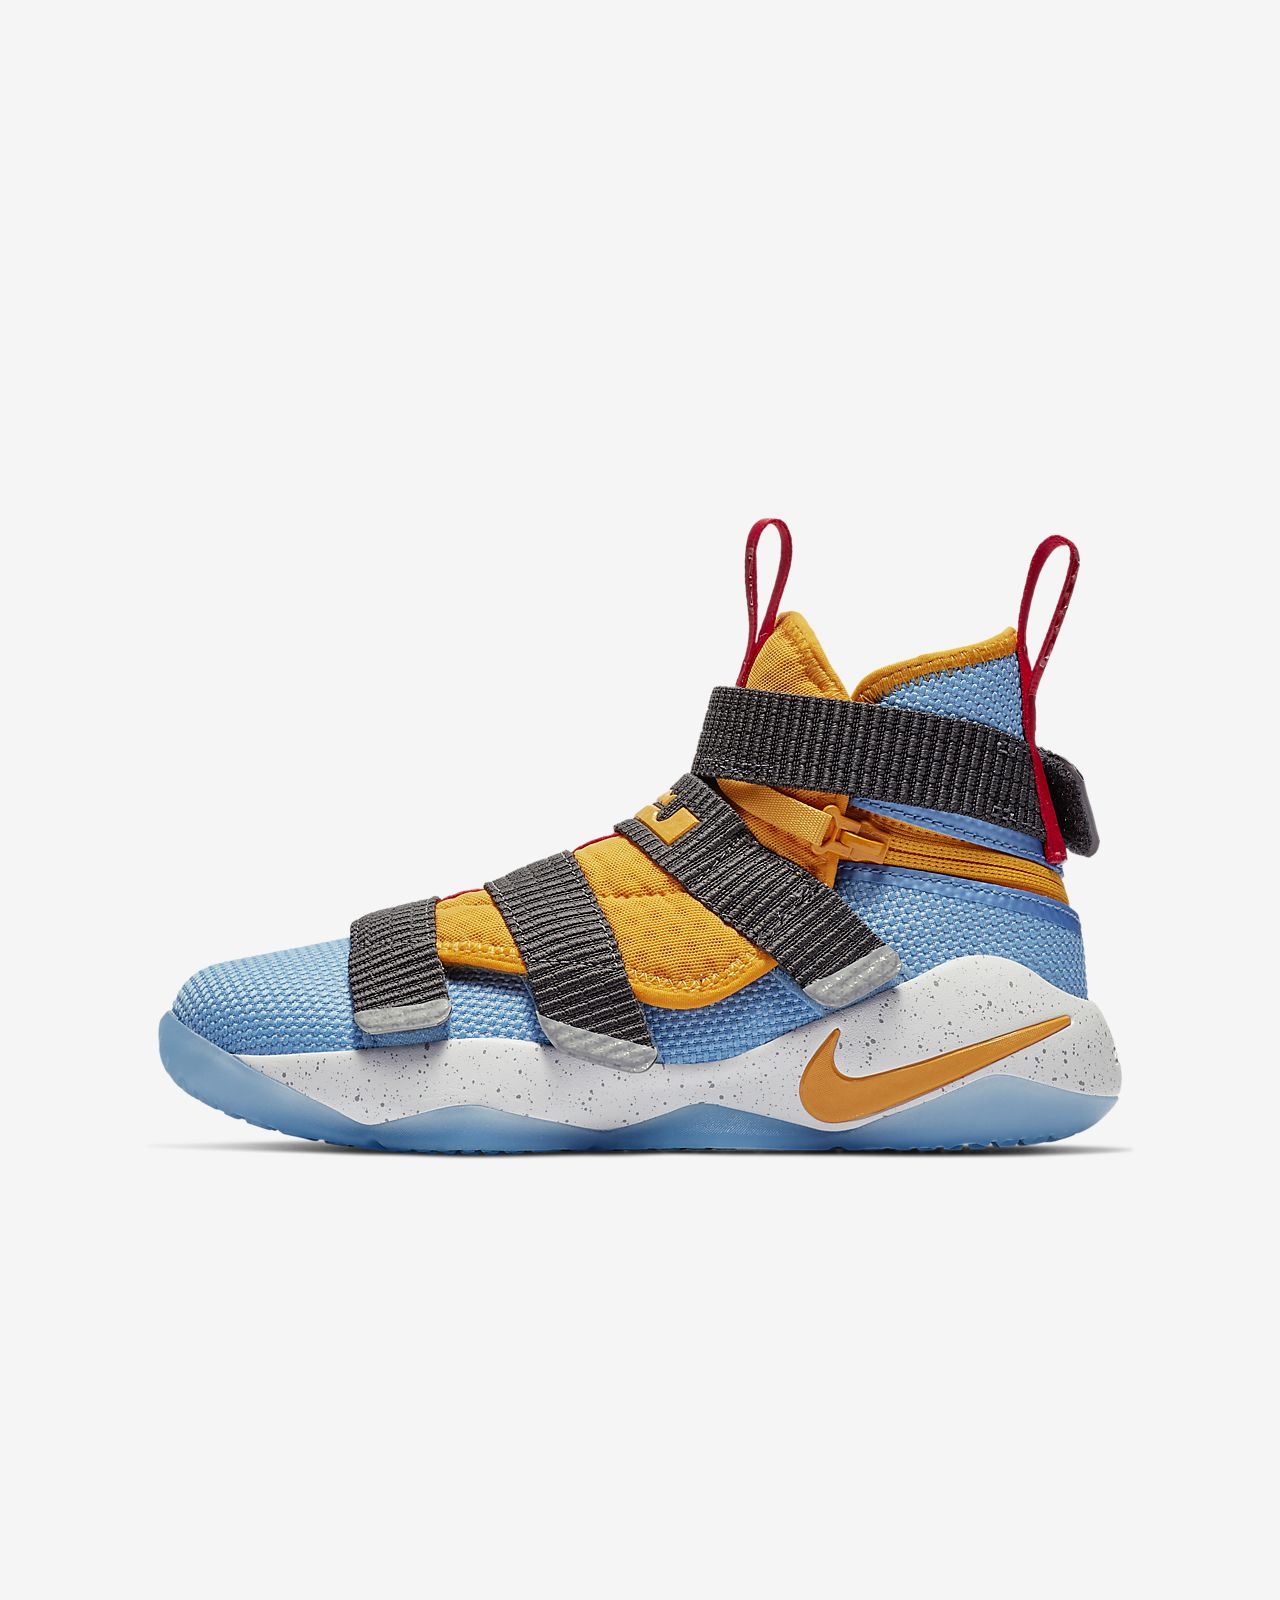 lebron soldier 11 flyease review